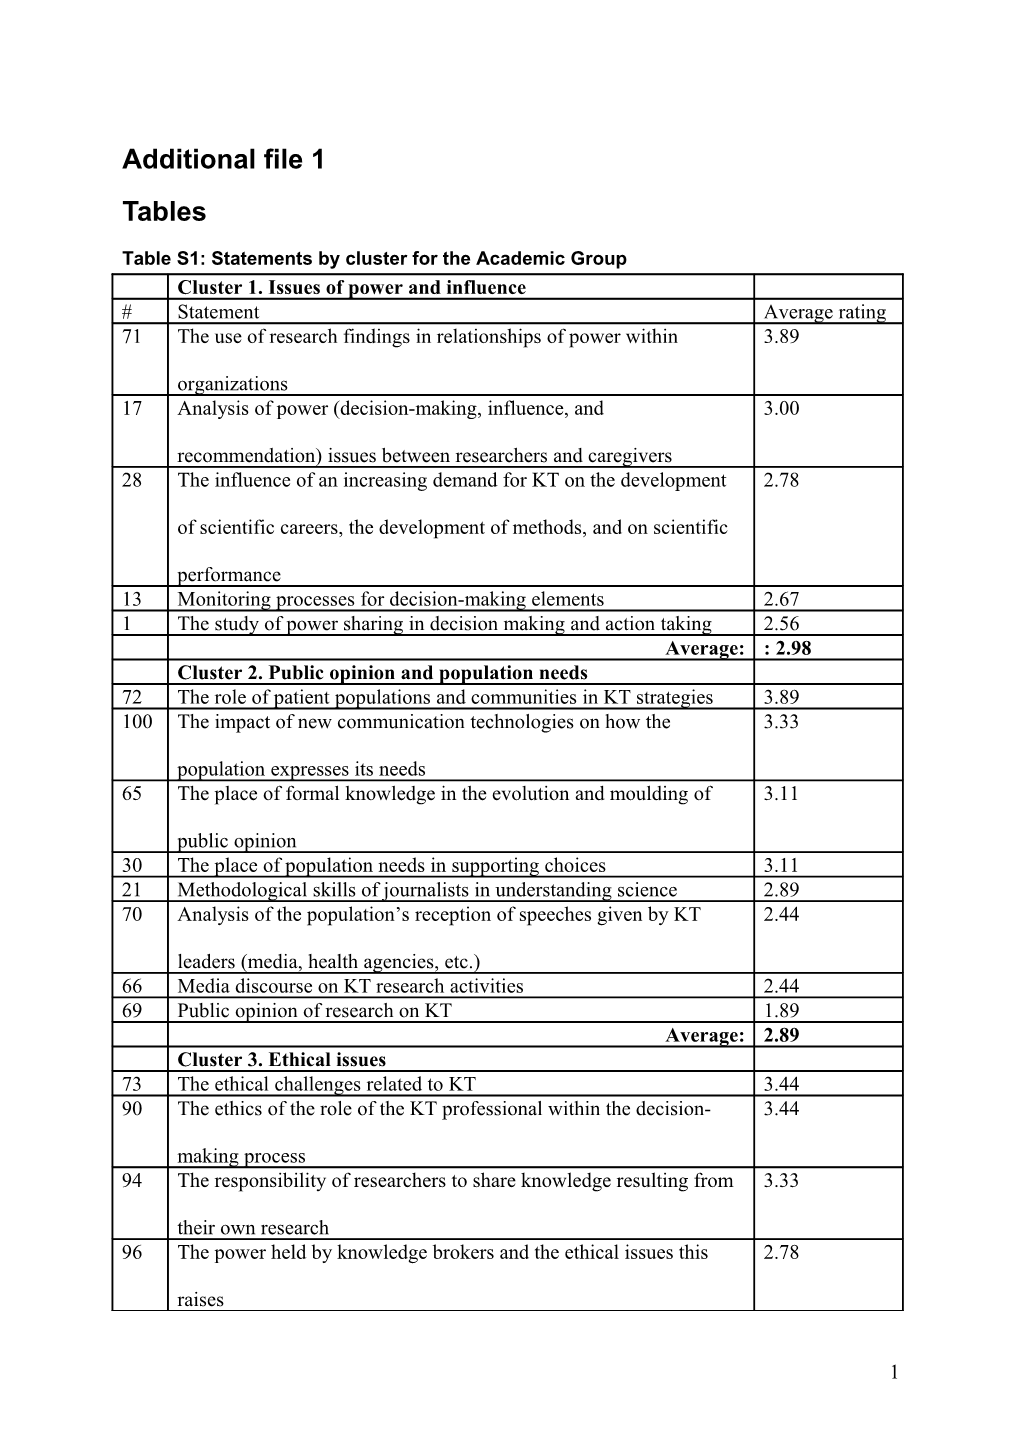 Table S1: Statements by Cluster for the Academic Group